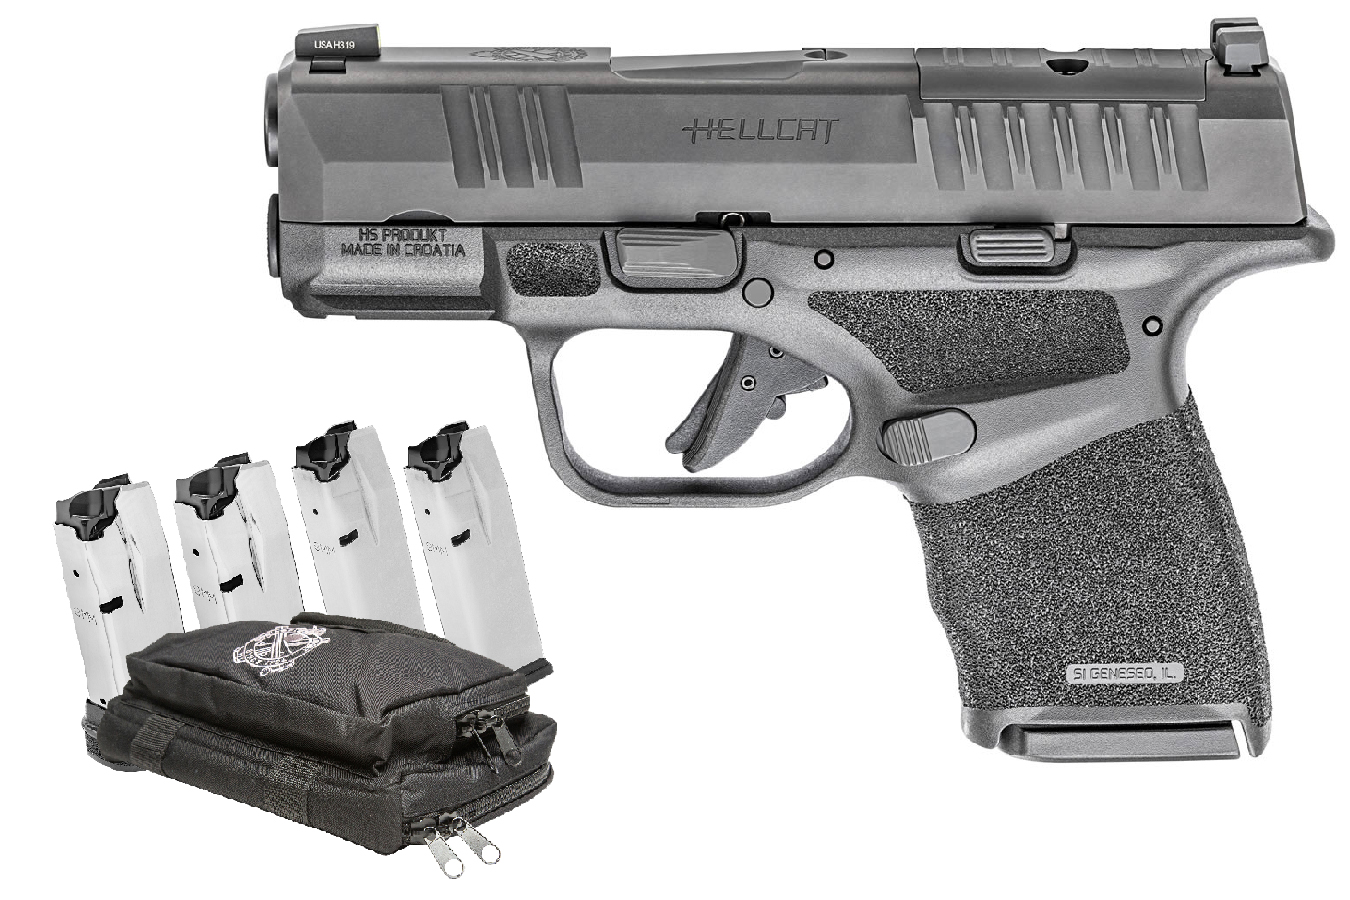 No. 23 Best Selling: SPRINGFIELD HELLCAT 9MM MICRO COMPACT OSP 3` GEAR UP